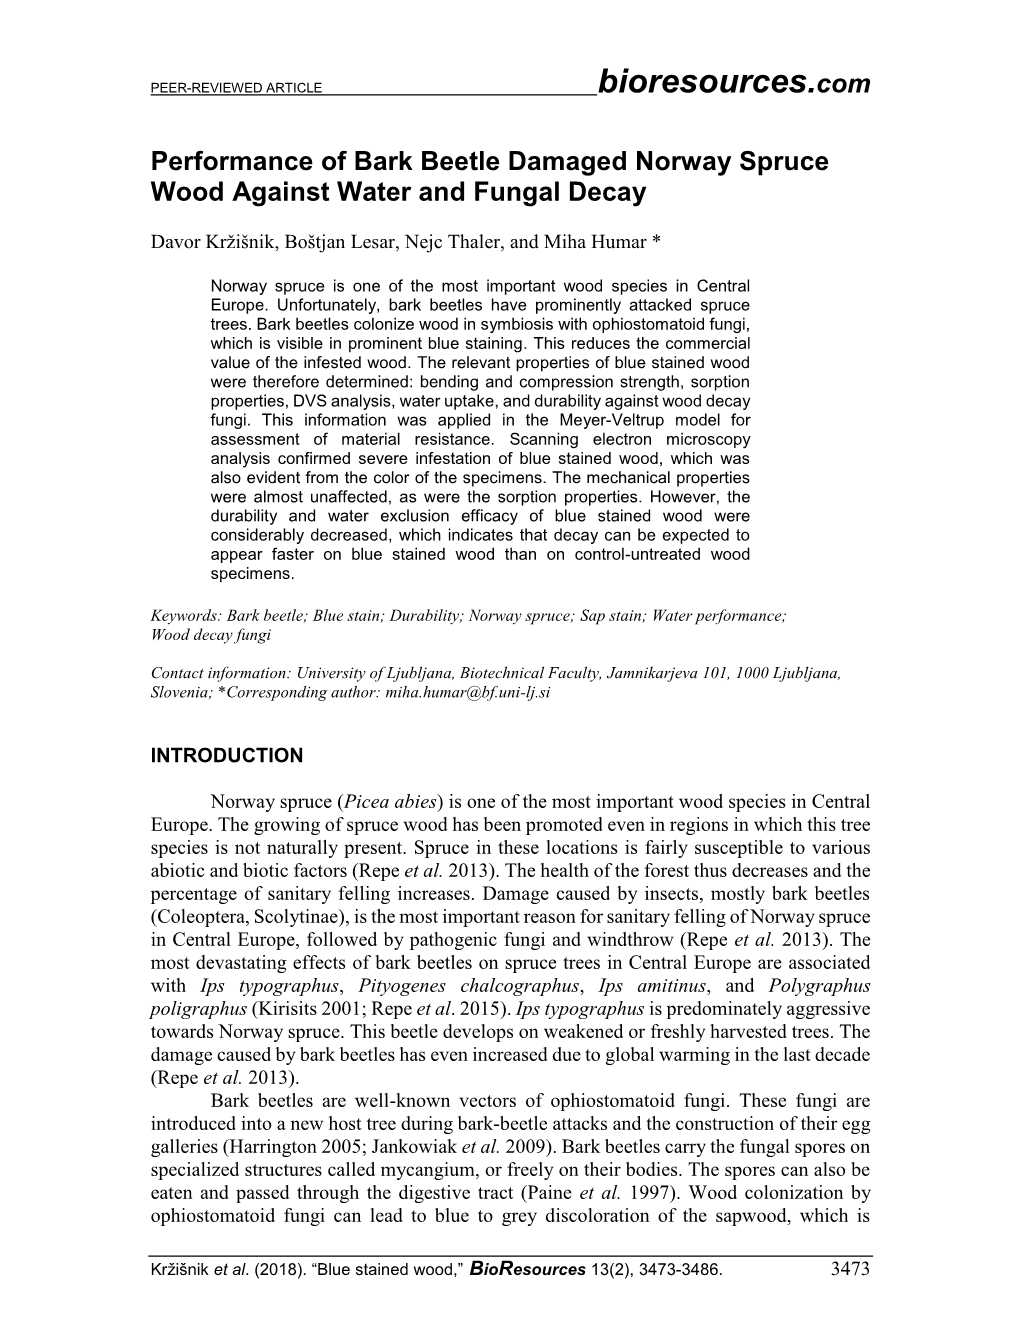 Performance of Bark Beetle Damaged Norway Spruce Wood Against Water and Fungal Decay